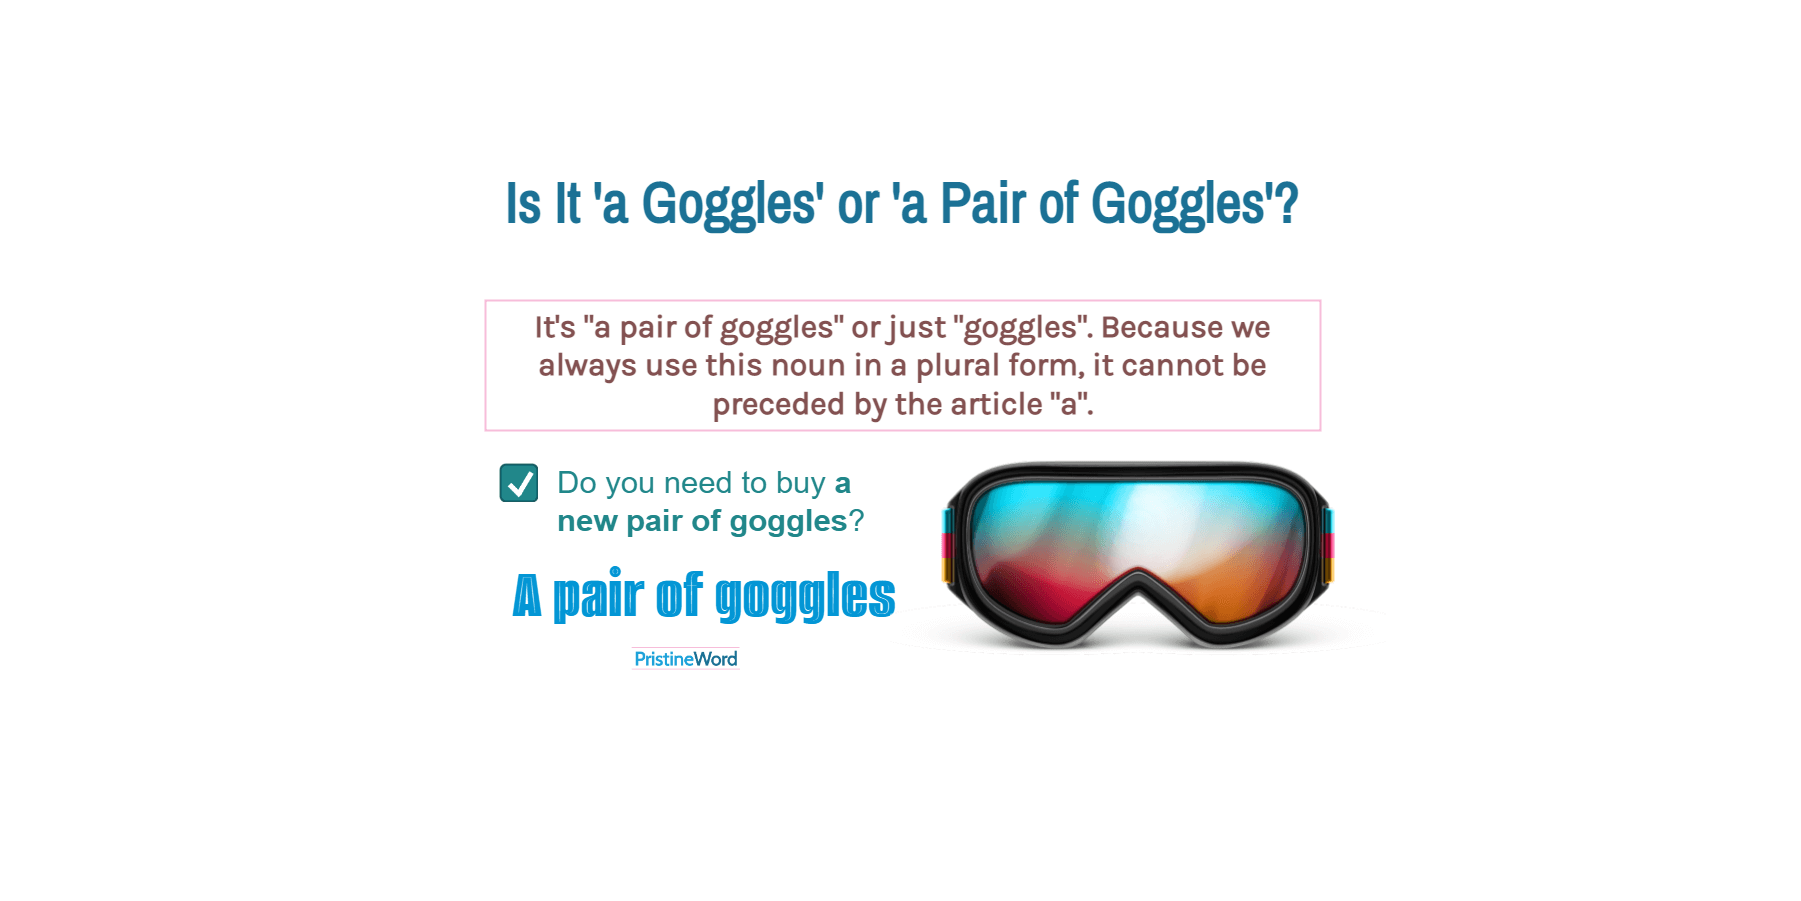 Is It 'a Goggles' or 'a Pair of Goggles'?